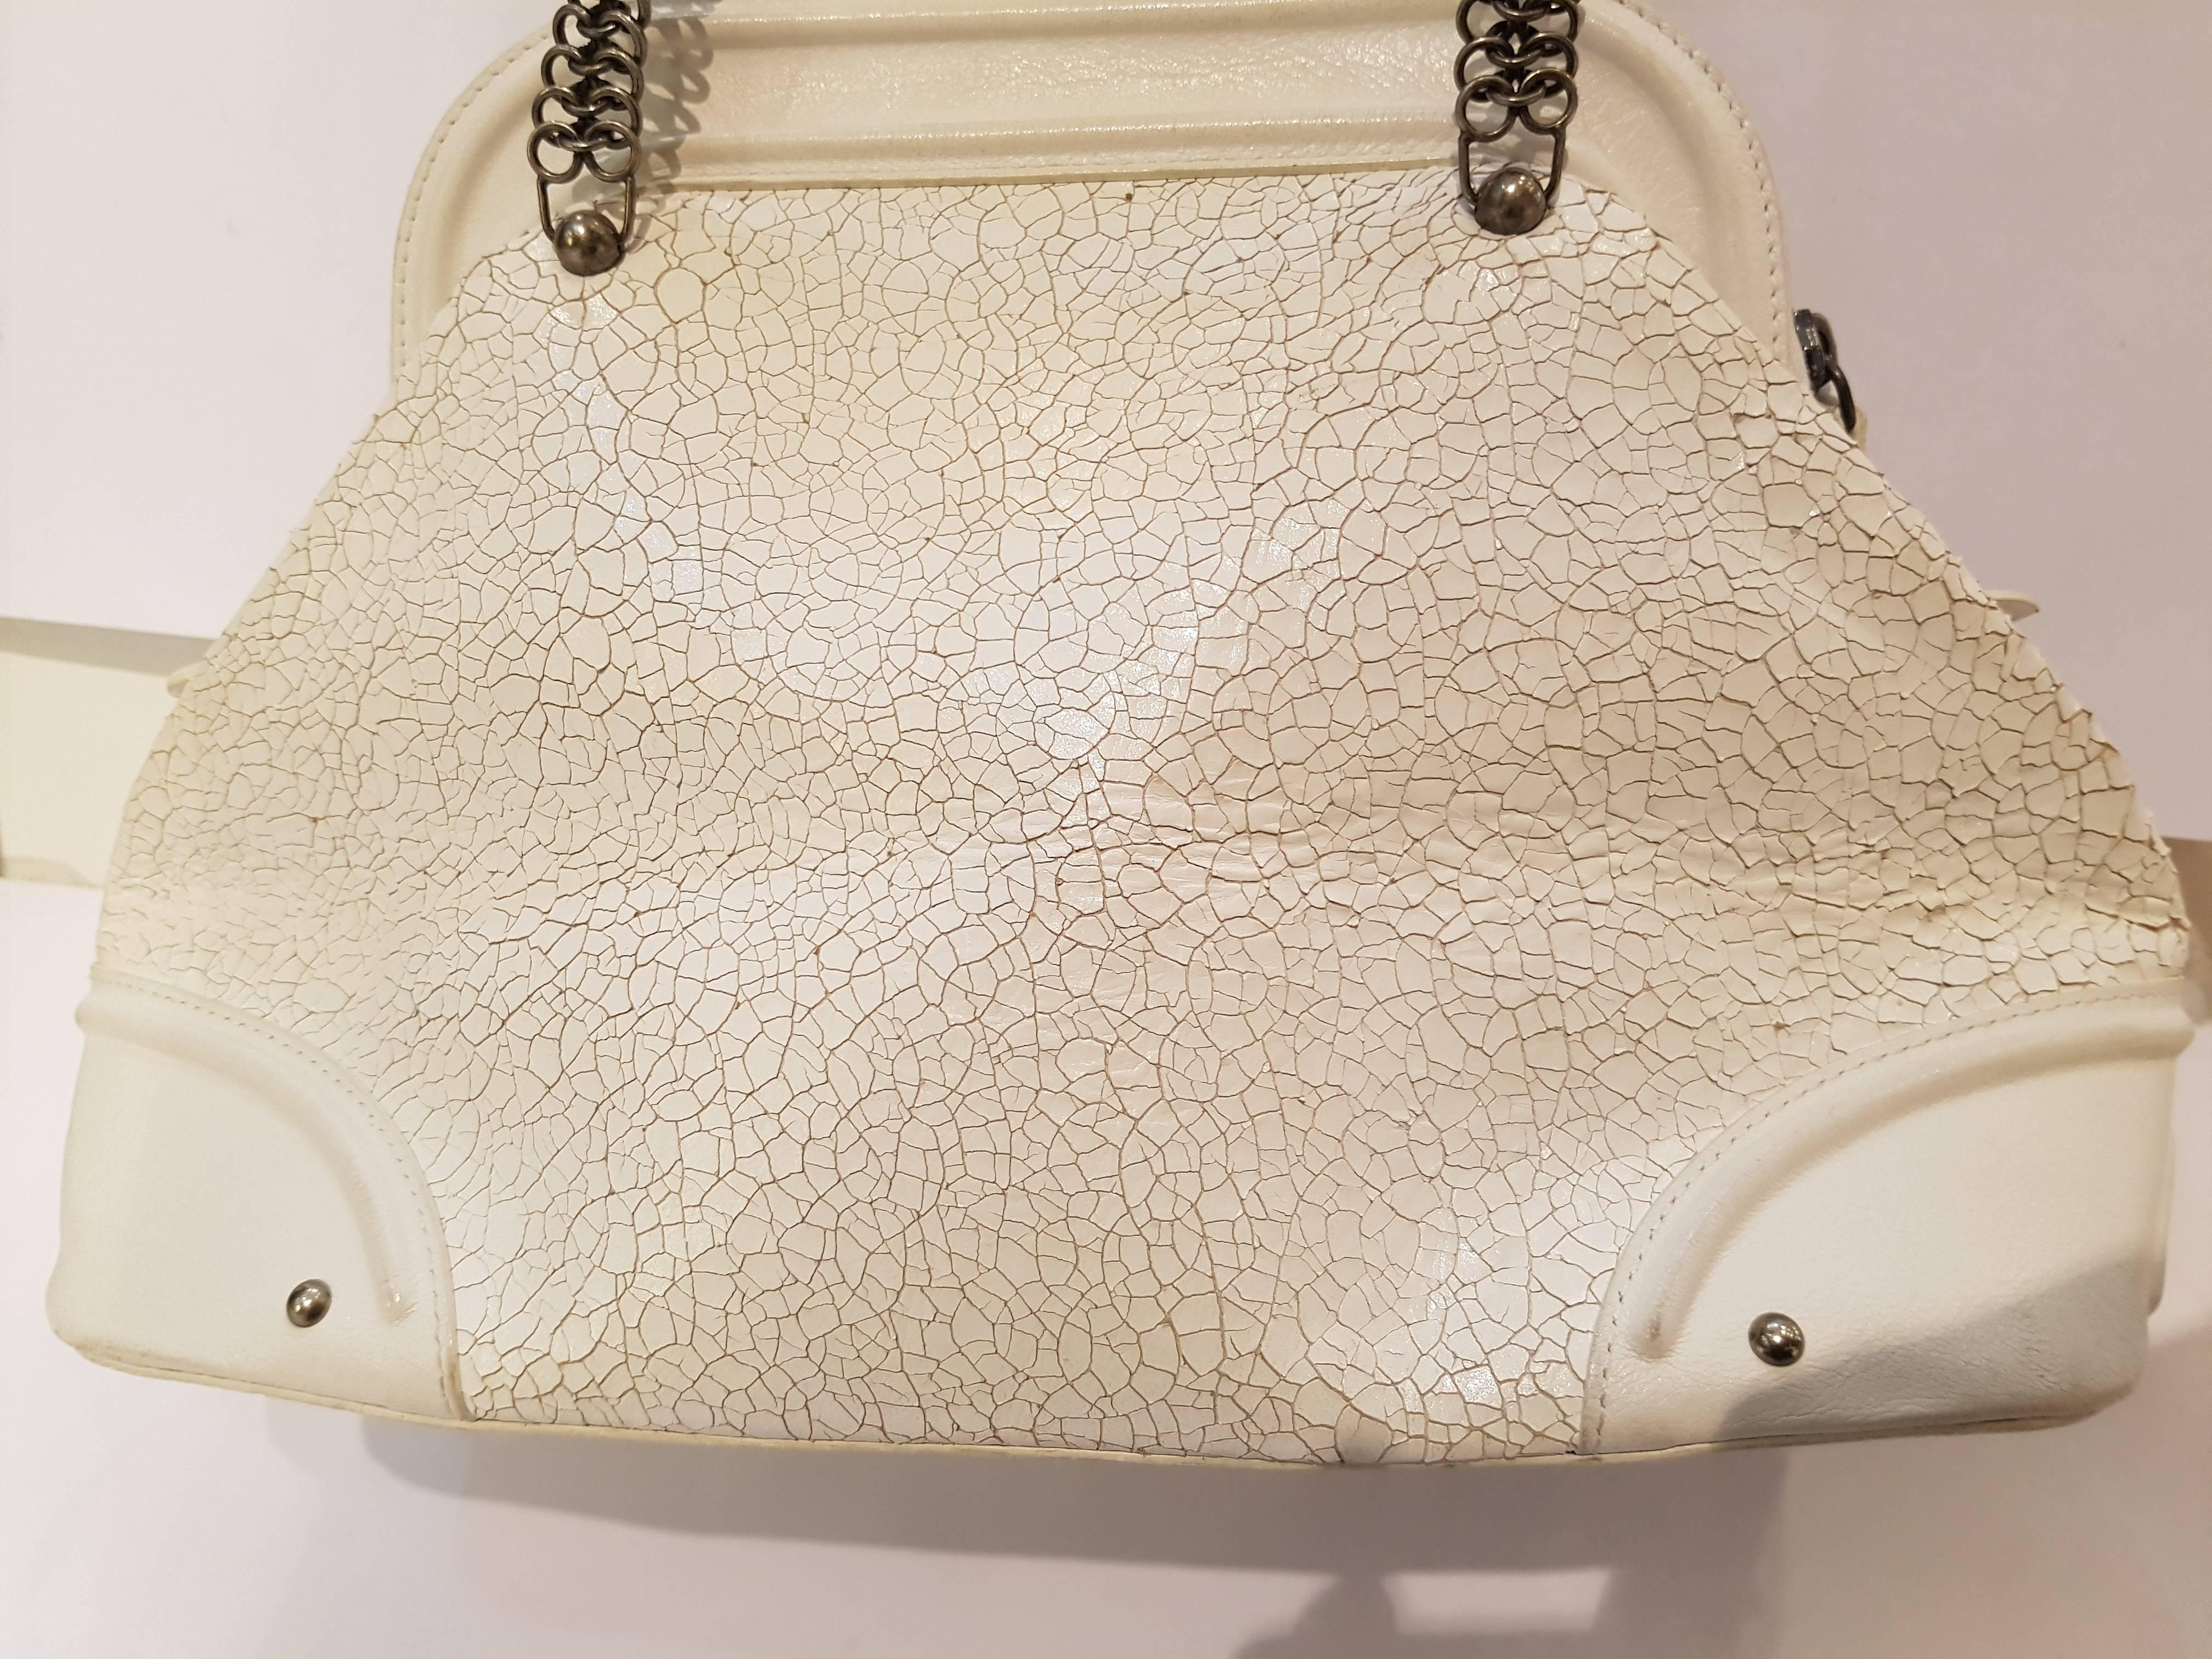 Christian Dior Nubuck Medium Jeanne Frame Bag 
This chic tote is beautifully crafted of chartreuse canvas. The bag features chartreuse leather trim and top handles of chain mail with leather grips as well as an oversized chain mail frontal belt.